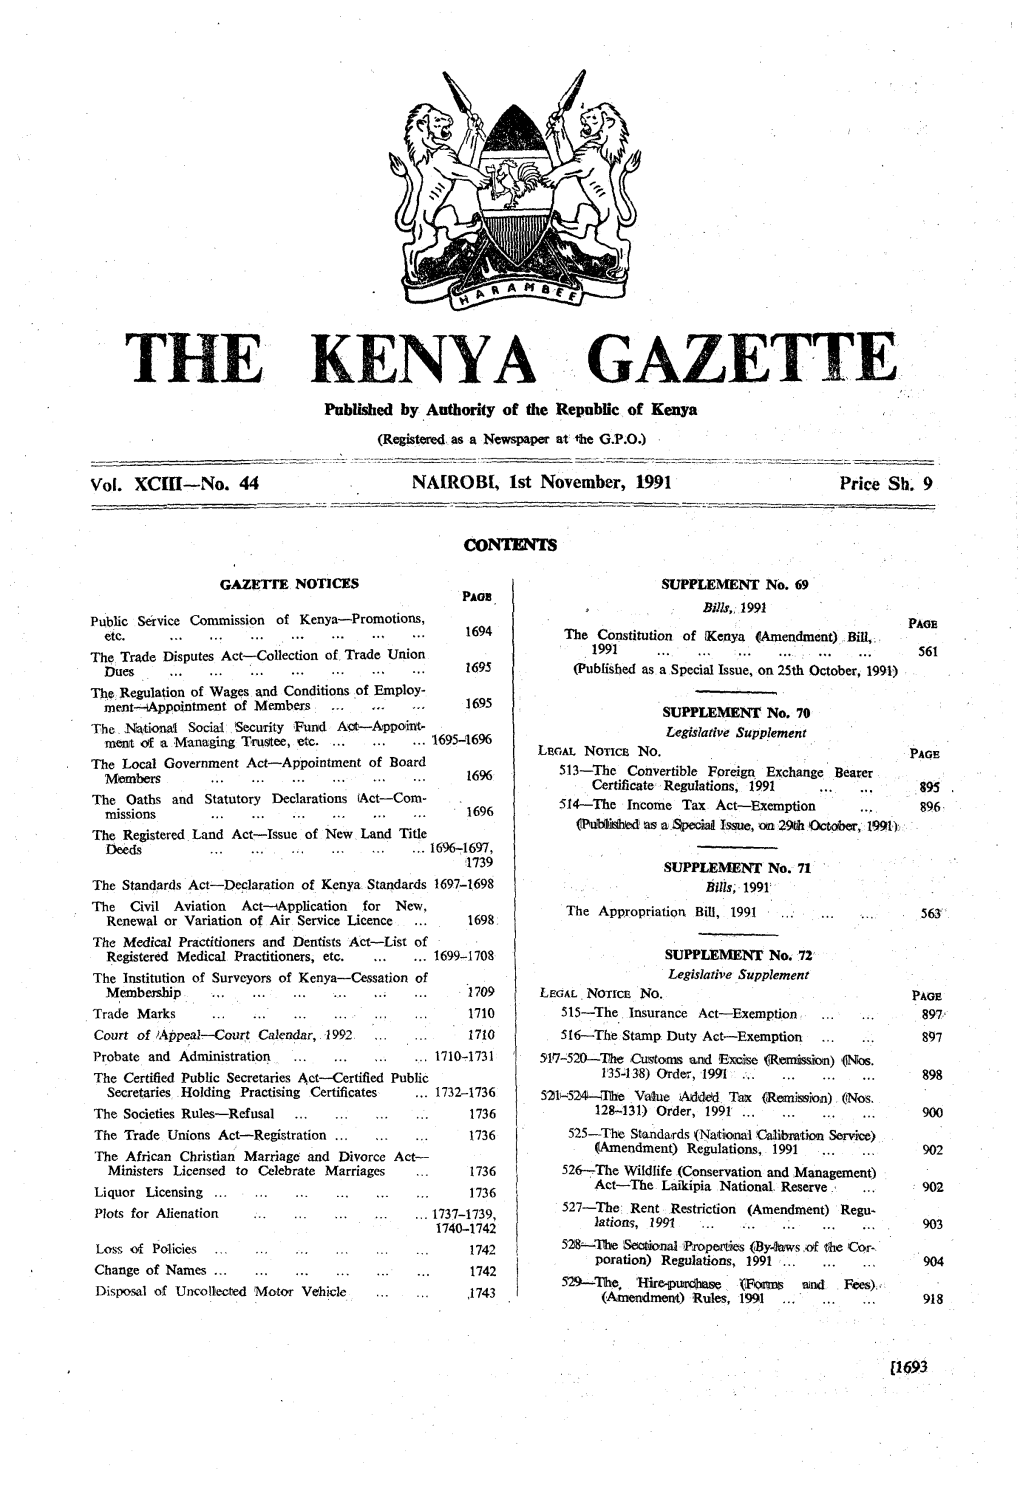 THE KENYA GAZETTE Published by Authority of the Republic of Kenya (Registwed As a Newpaper a U$E G.P.O.)